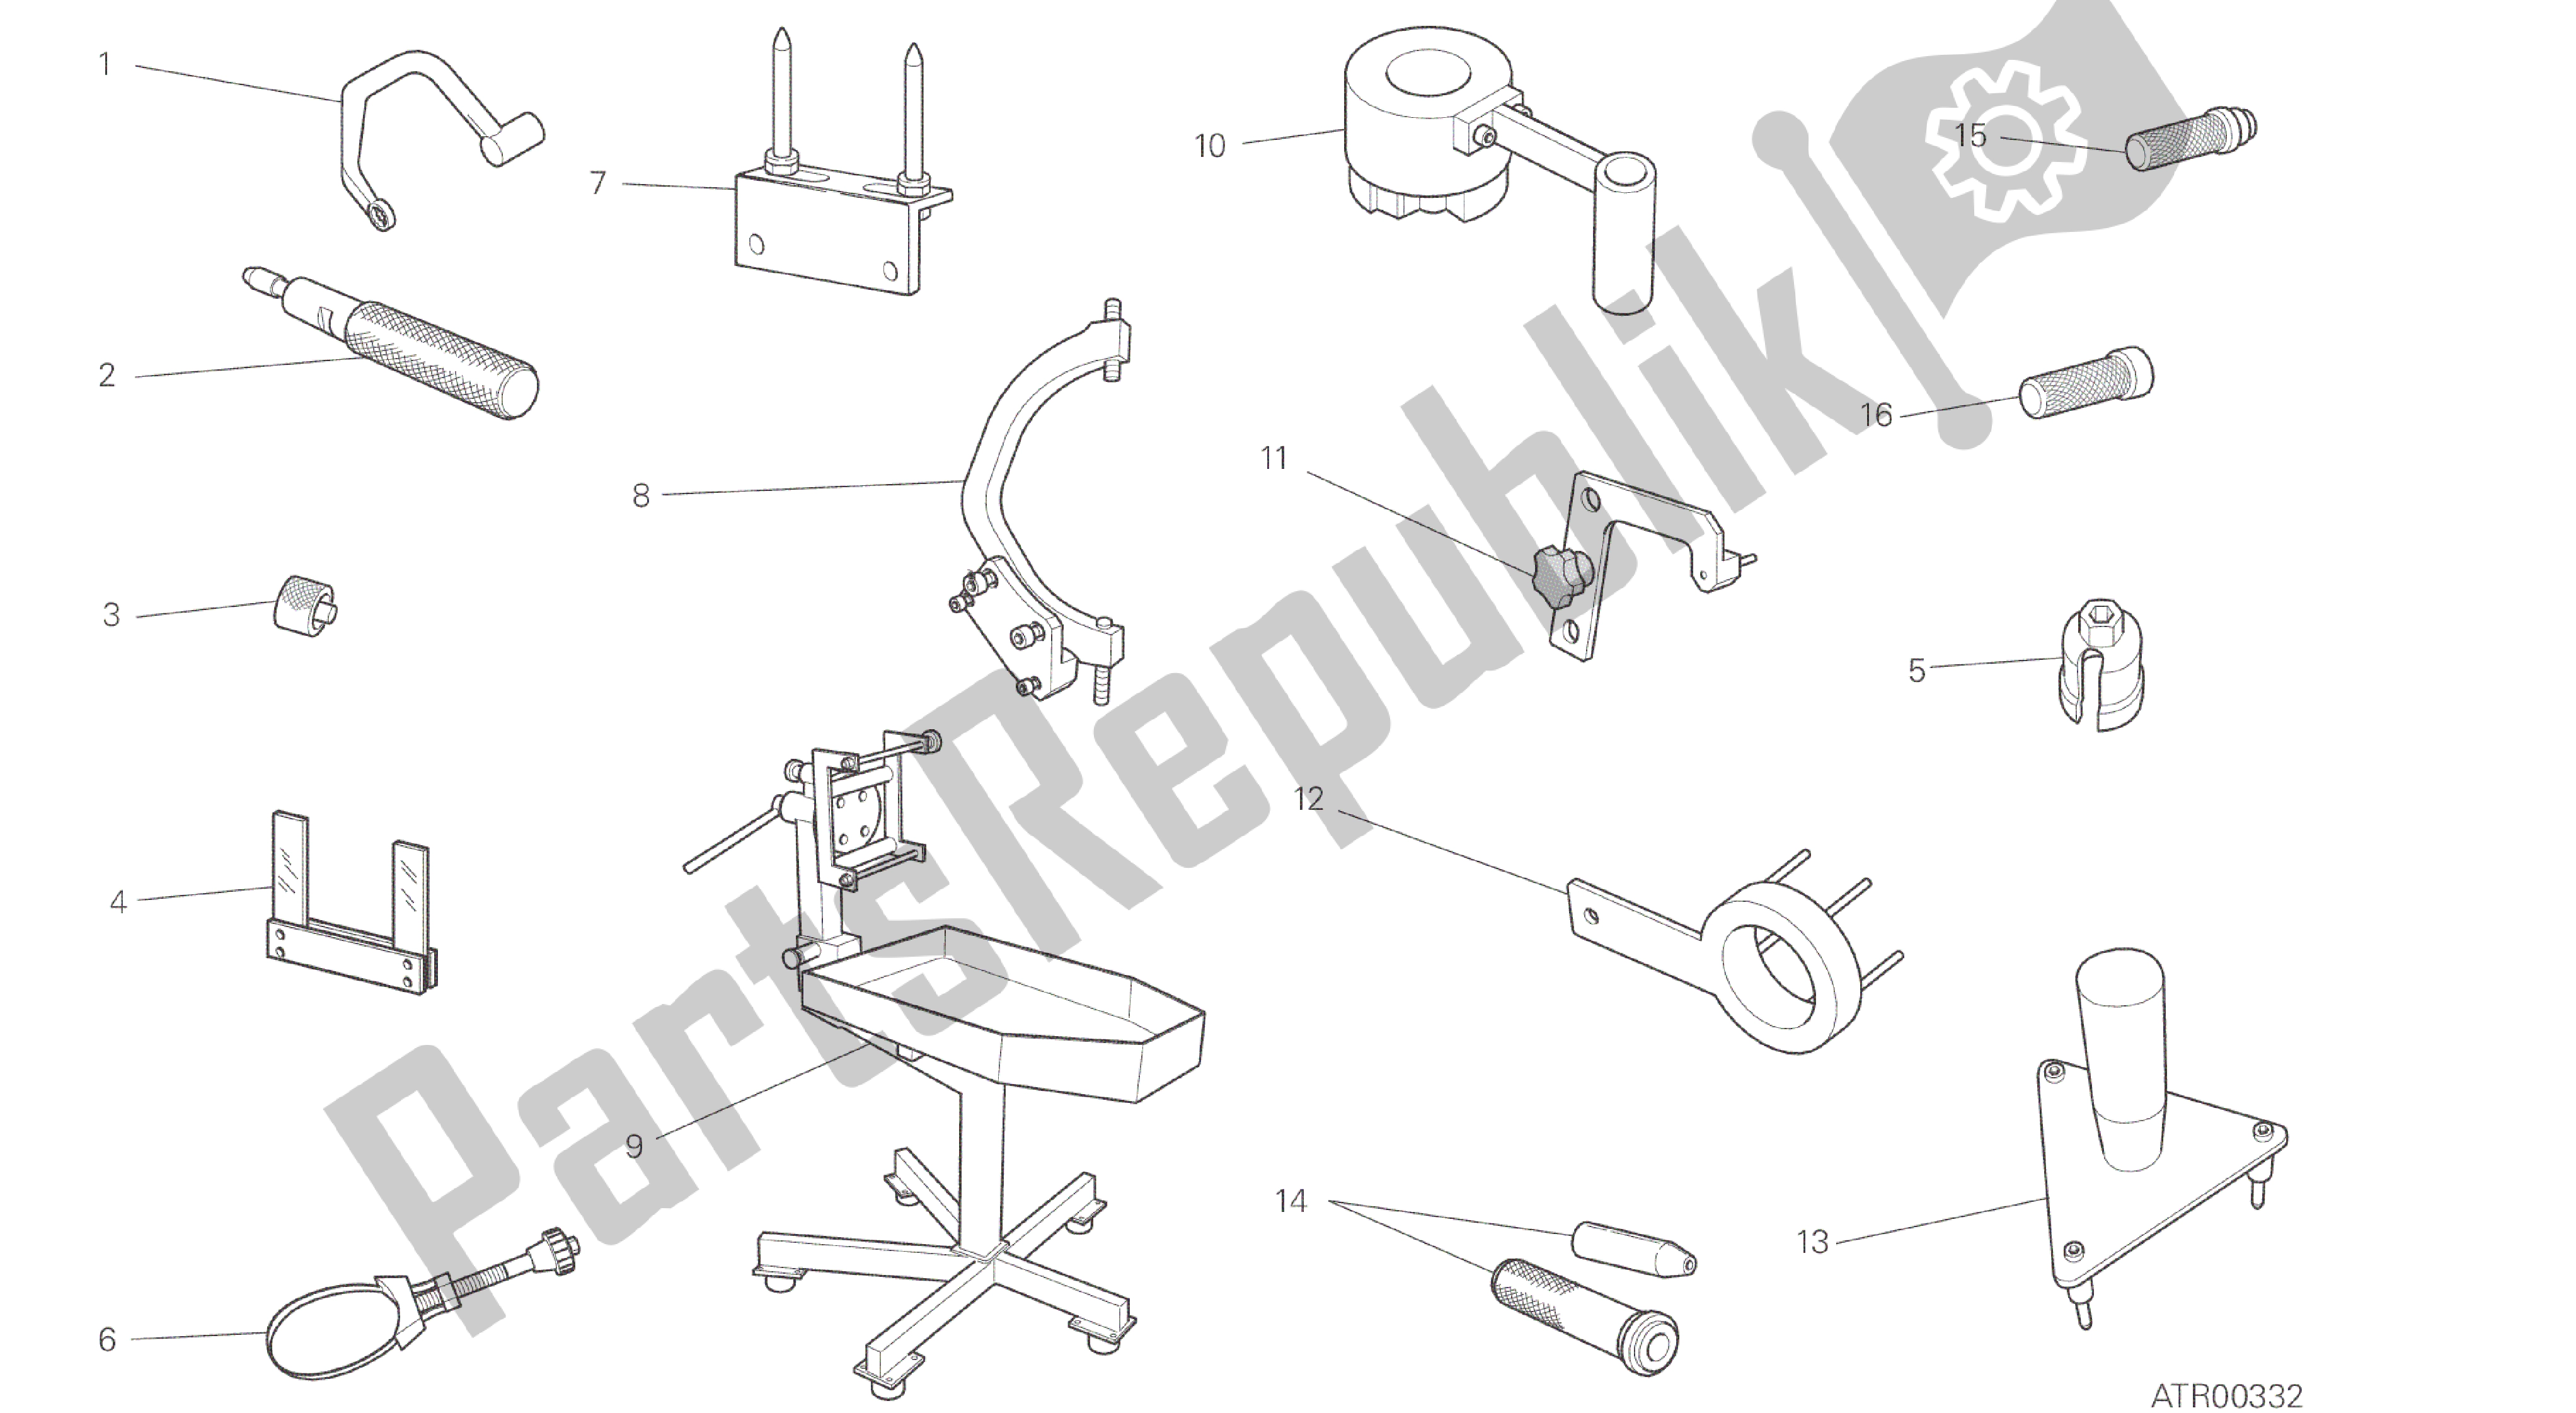 All parts for the Drawing 001 - Workshop Service Tools [mod:dvl]group Tools of the Ducati Diavel 1200 2016